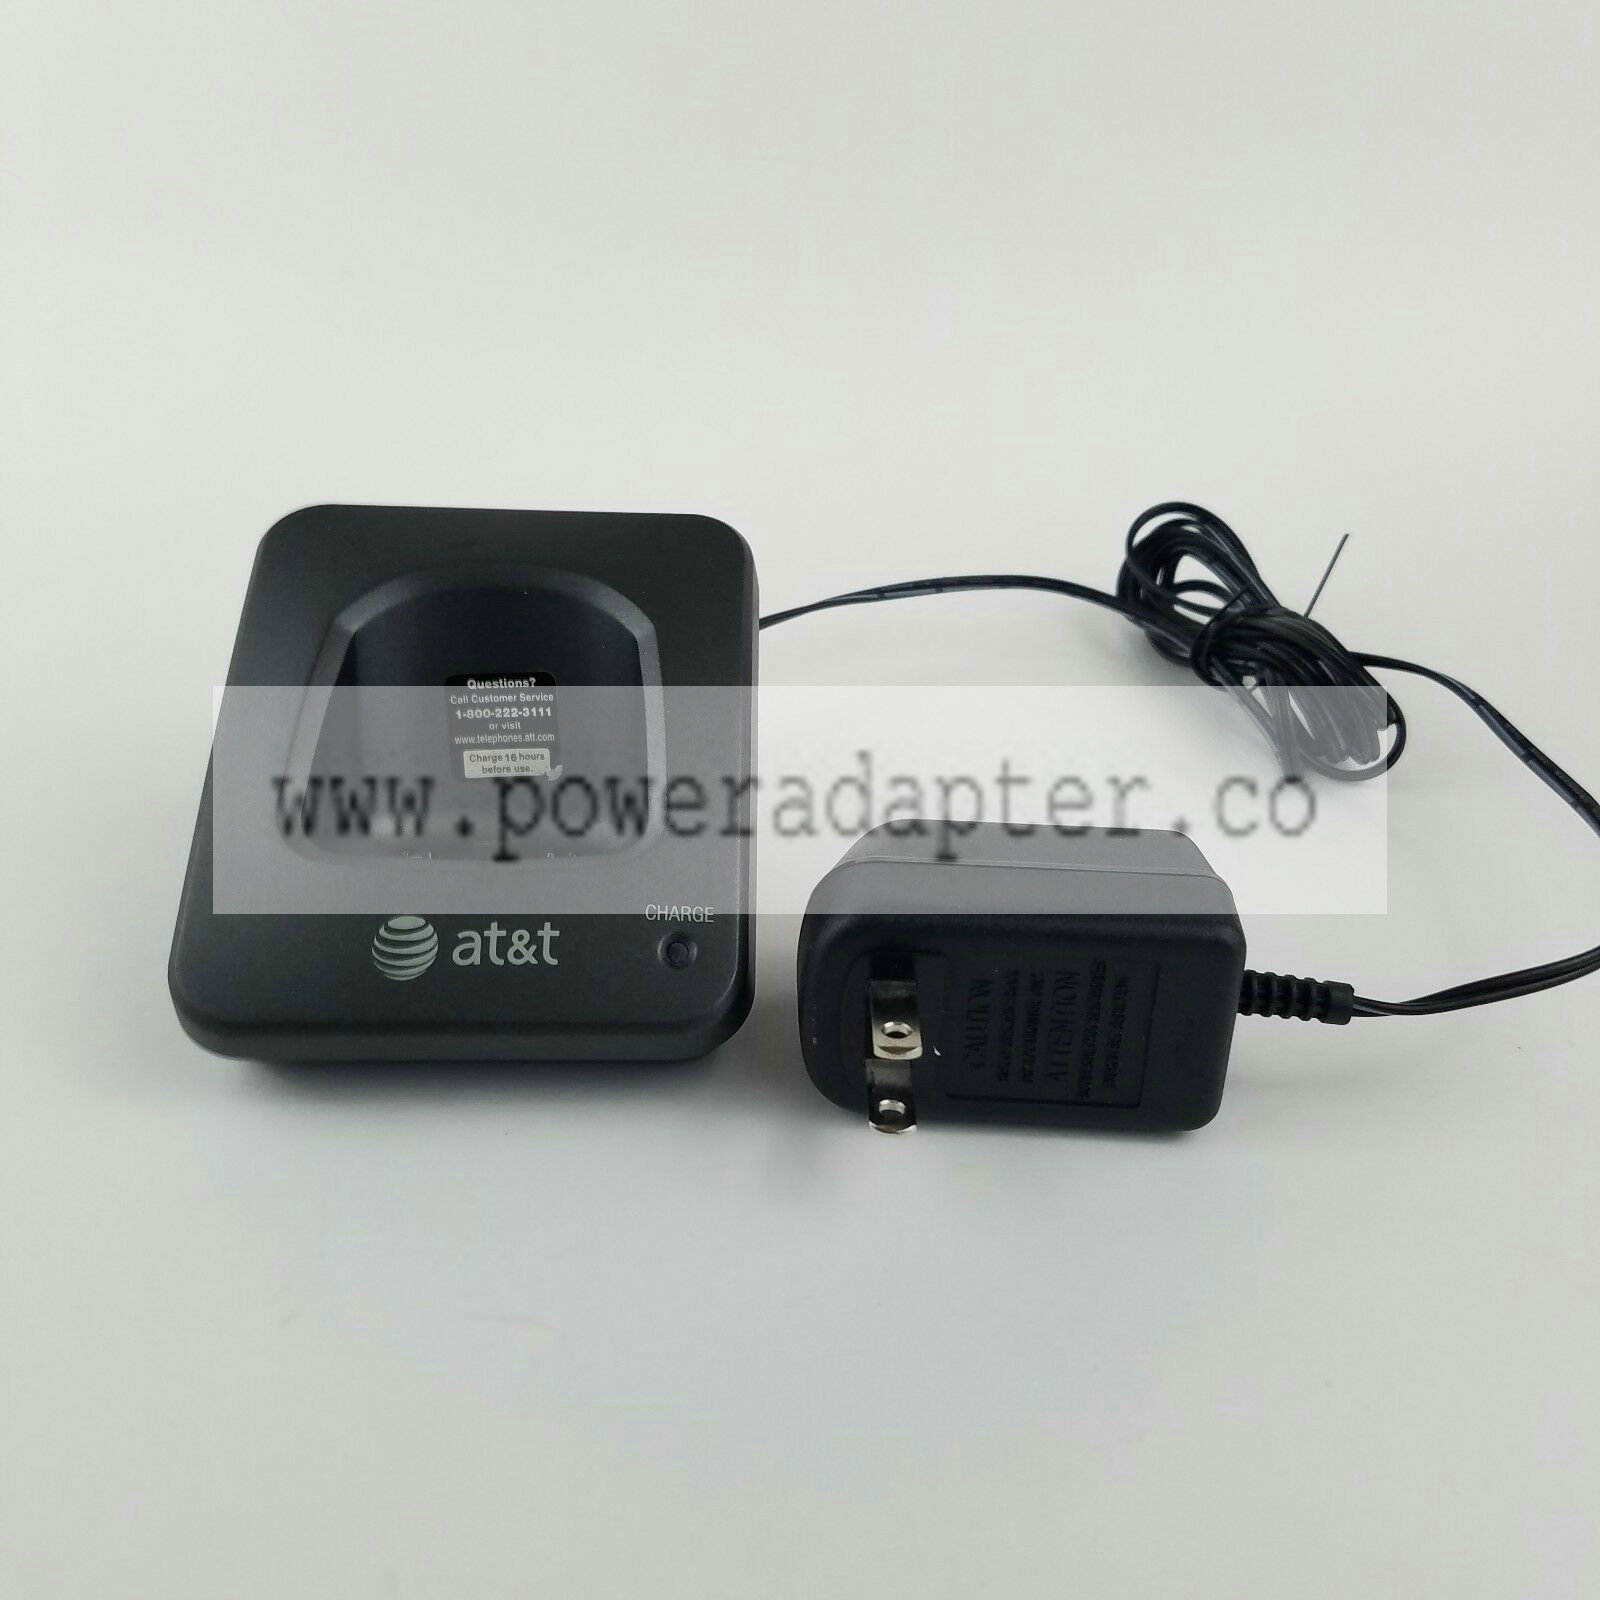 AT&T Cradle Base Handset Charger Replacement DC 9V 150 mA With Adaptor Output Voltage: 9 V Country/Region of Manufact